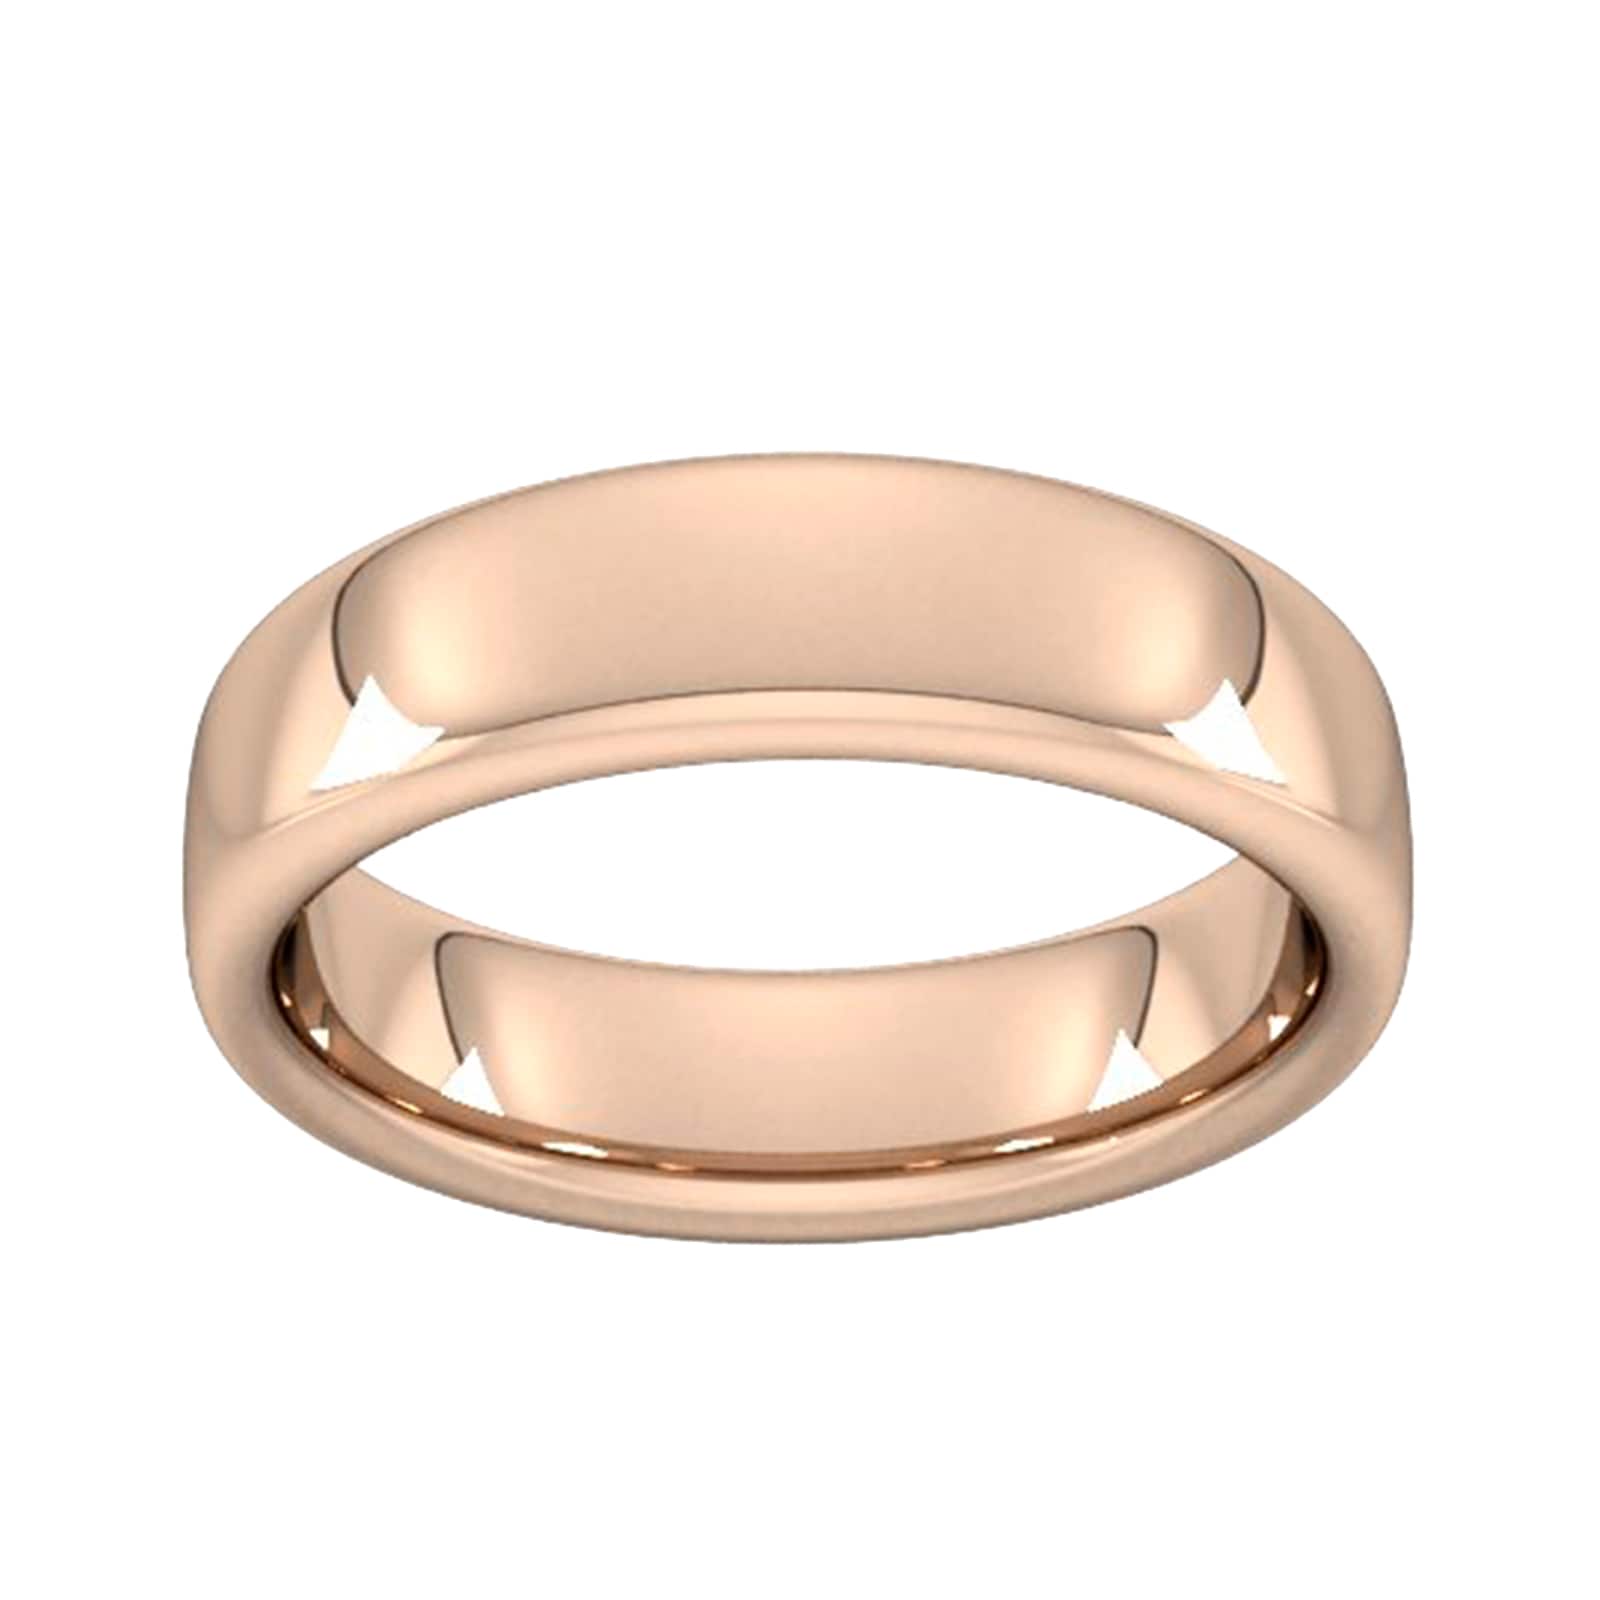 6mm Slight Court Extra Heavy Wedding Ring In 9 Carat Rose Gold - Ring Size R